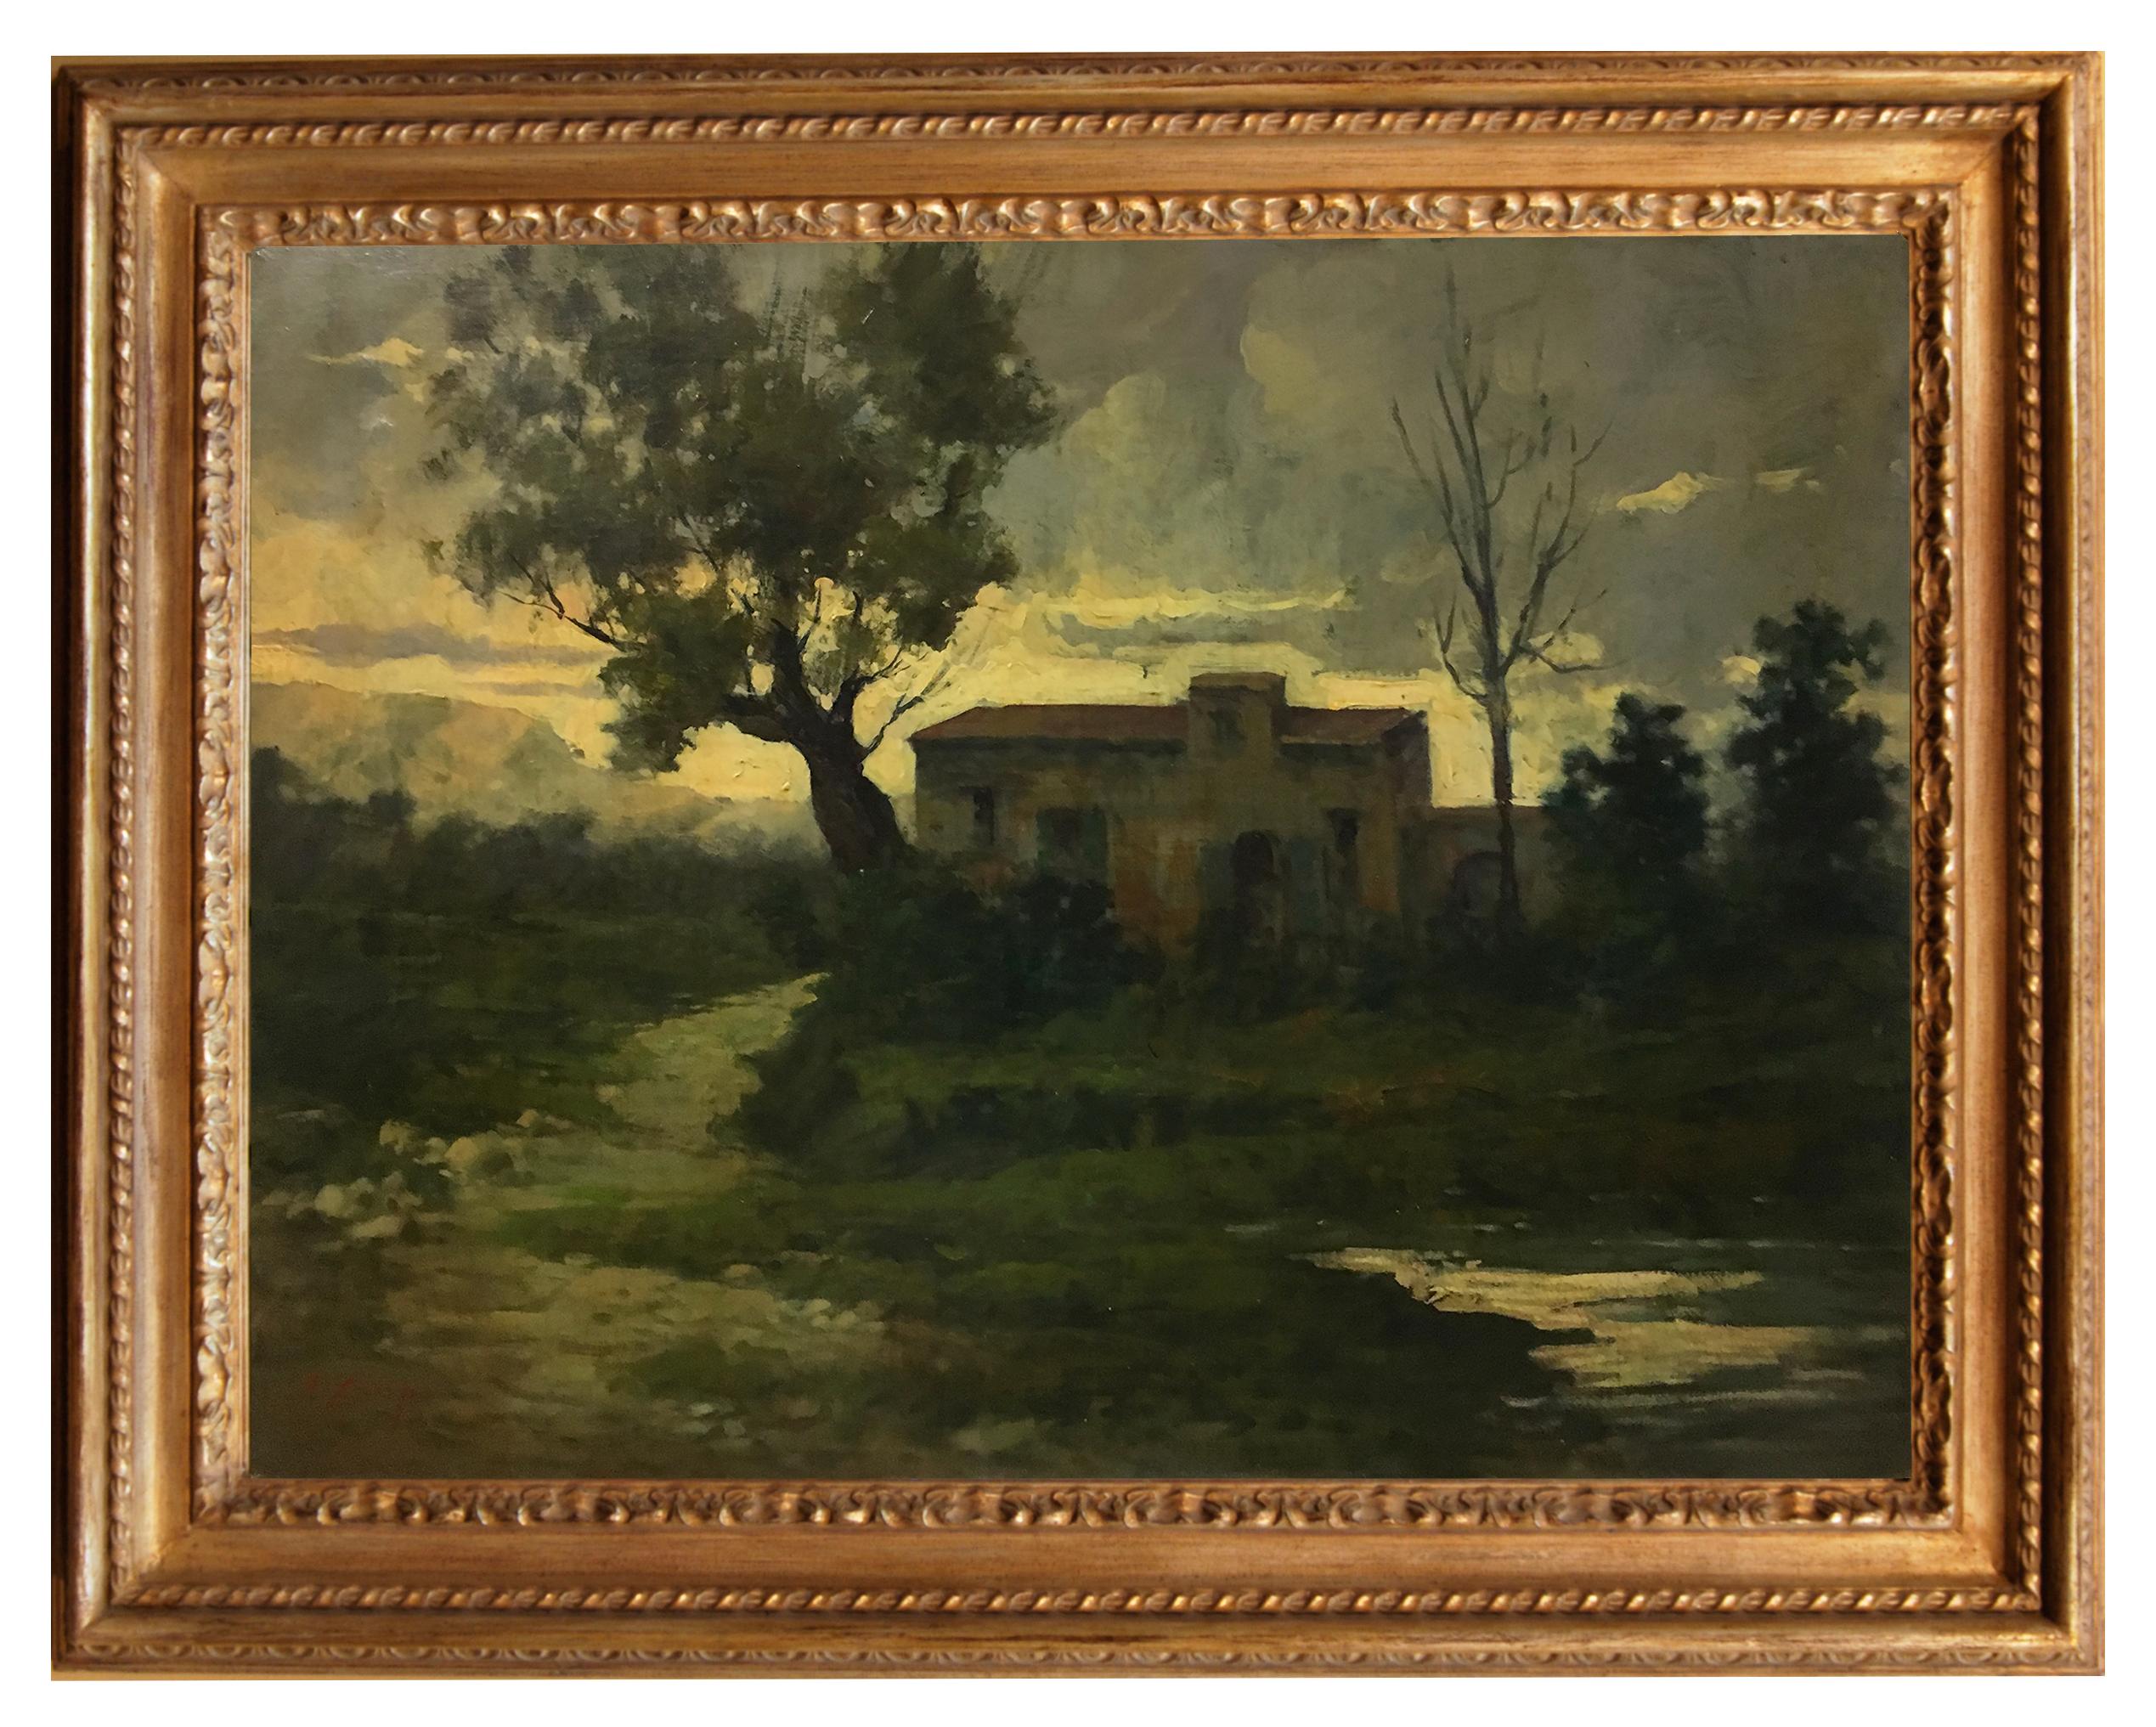 Antonio Crespi Landscape Painting - COUNTRY LANDSCAPE - Italian Oil on Canvas Painting.